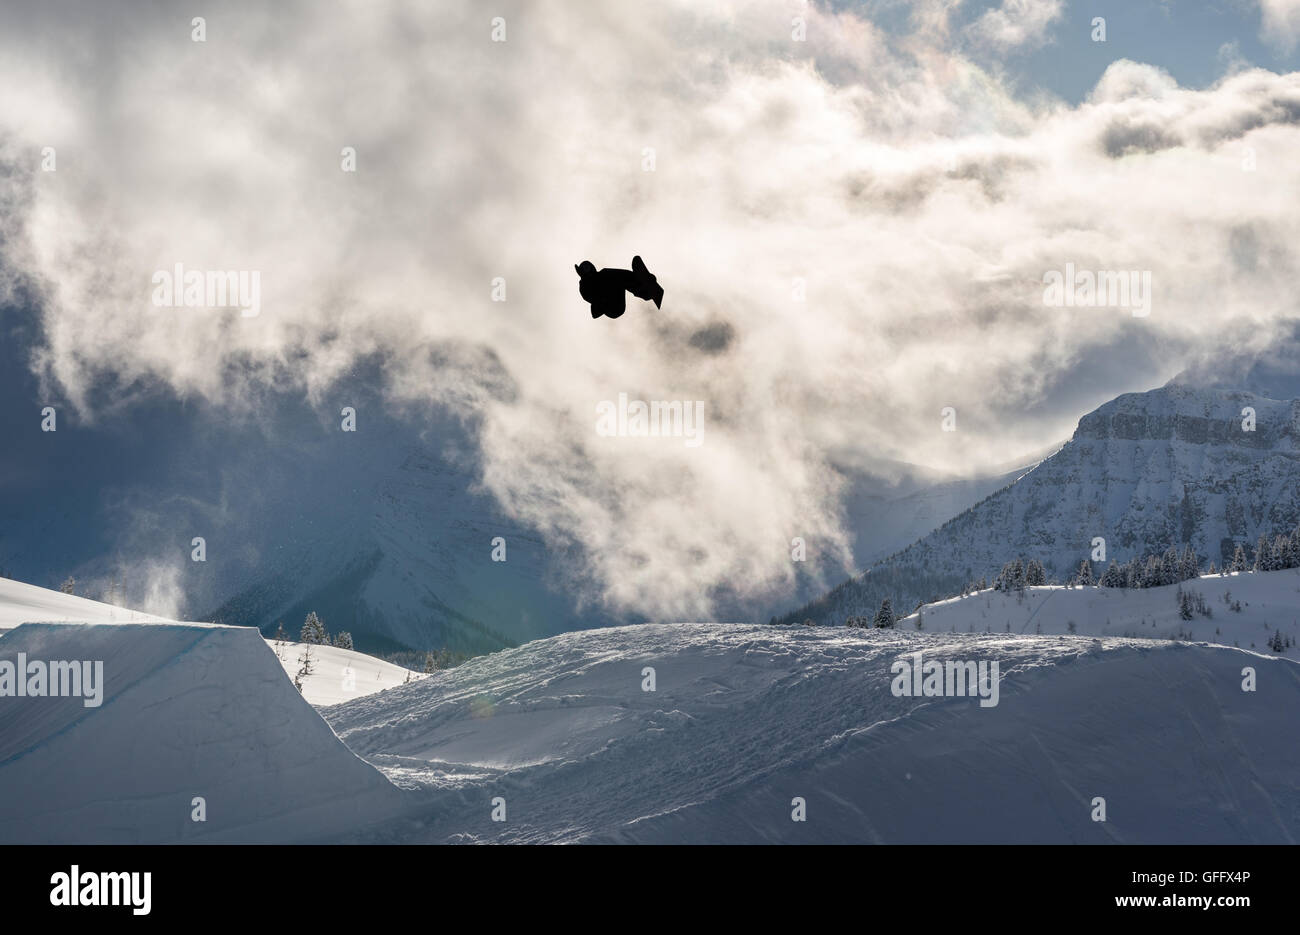 Snowboarder performing a flip off a large jump in the mountains Stock Photo